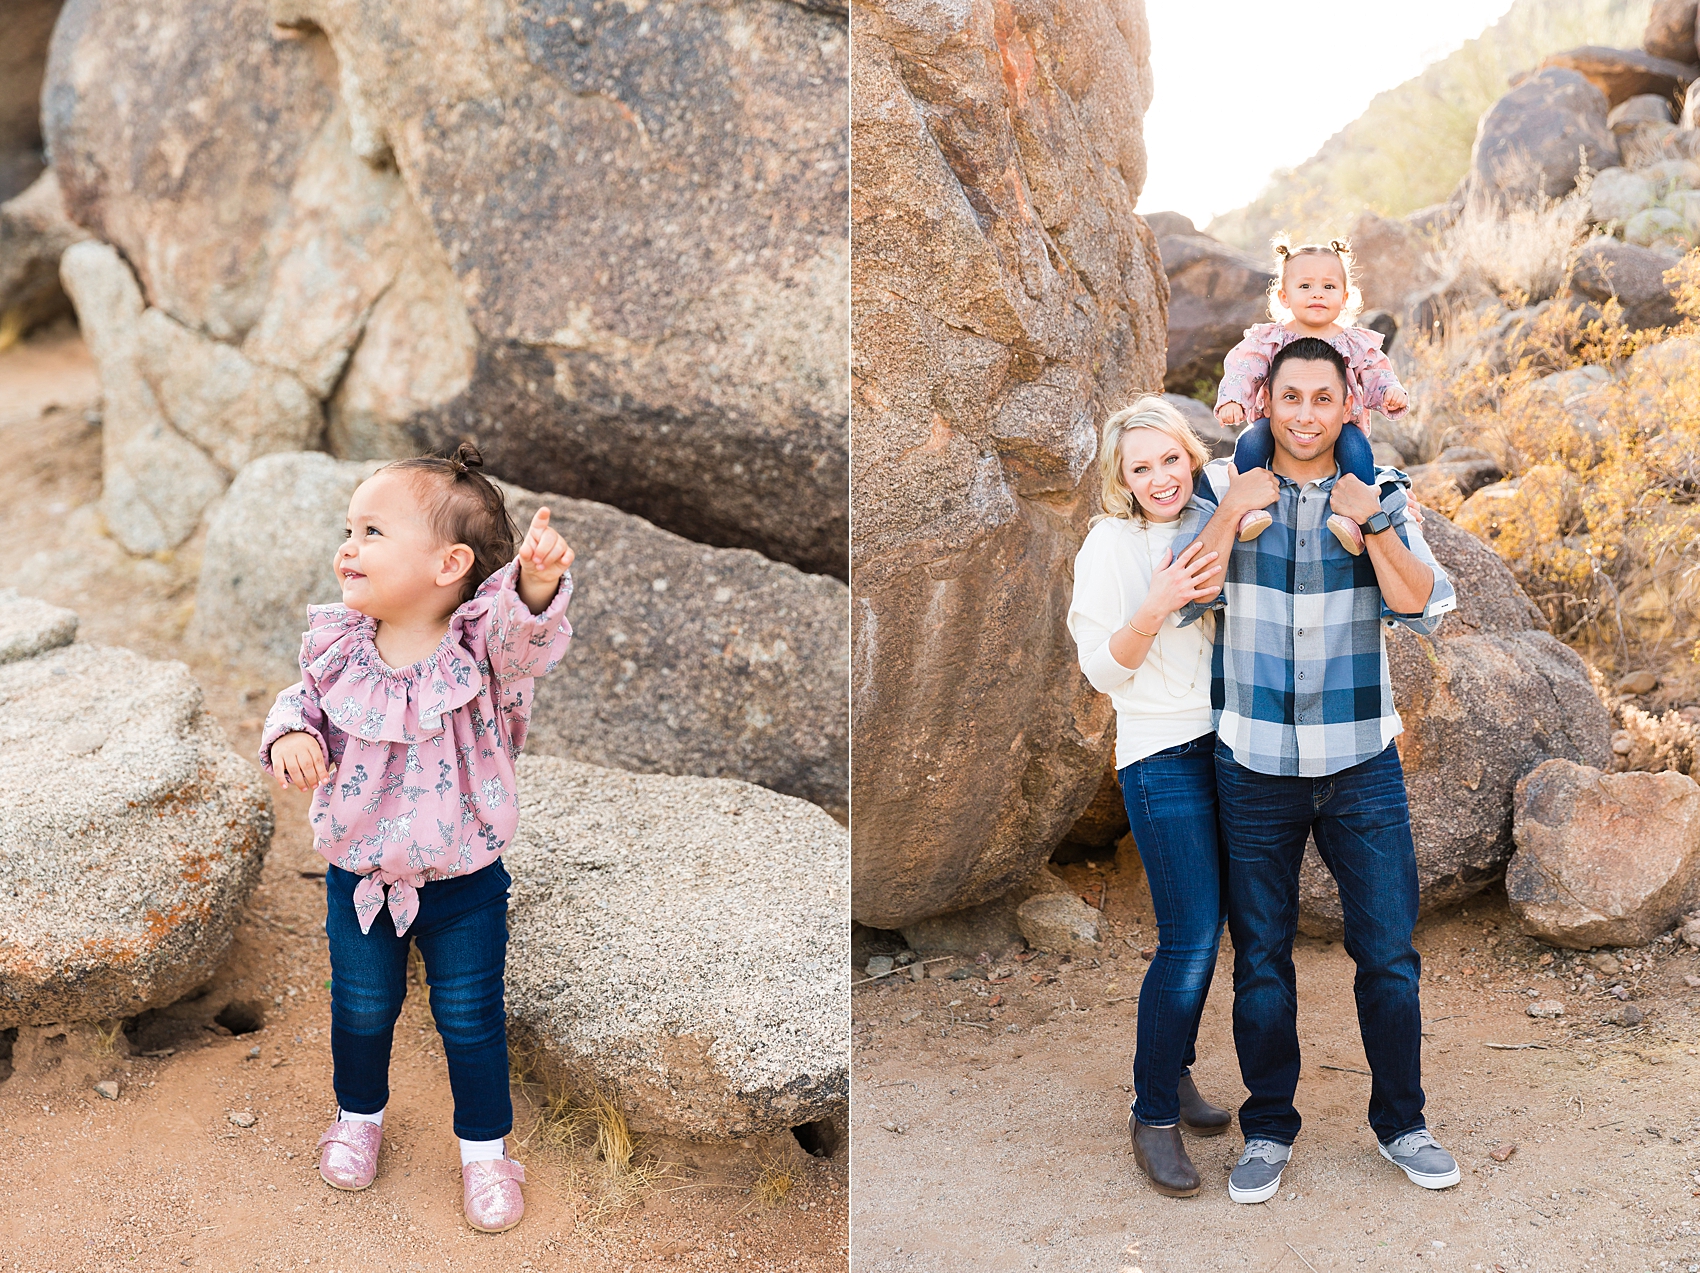 Leah Hope Photography | Scottsdale Phoenix Arizona | Desert Landscape Cactus Boulders Scenery | Family Pictures | What to Wear | Family Poses